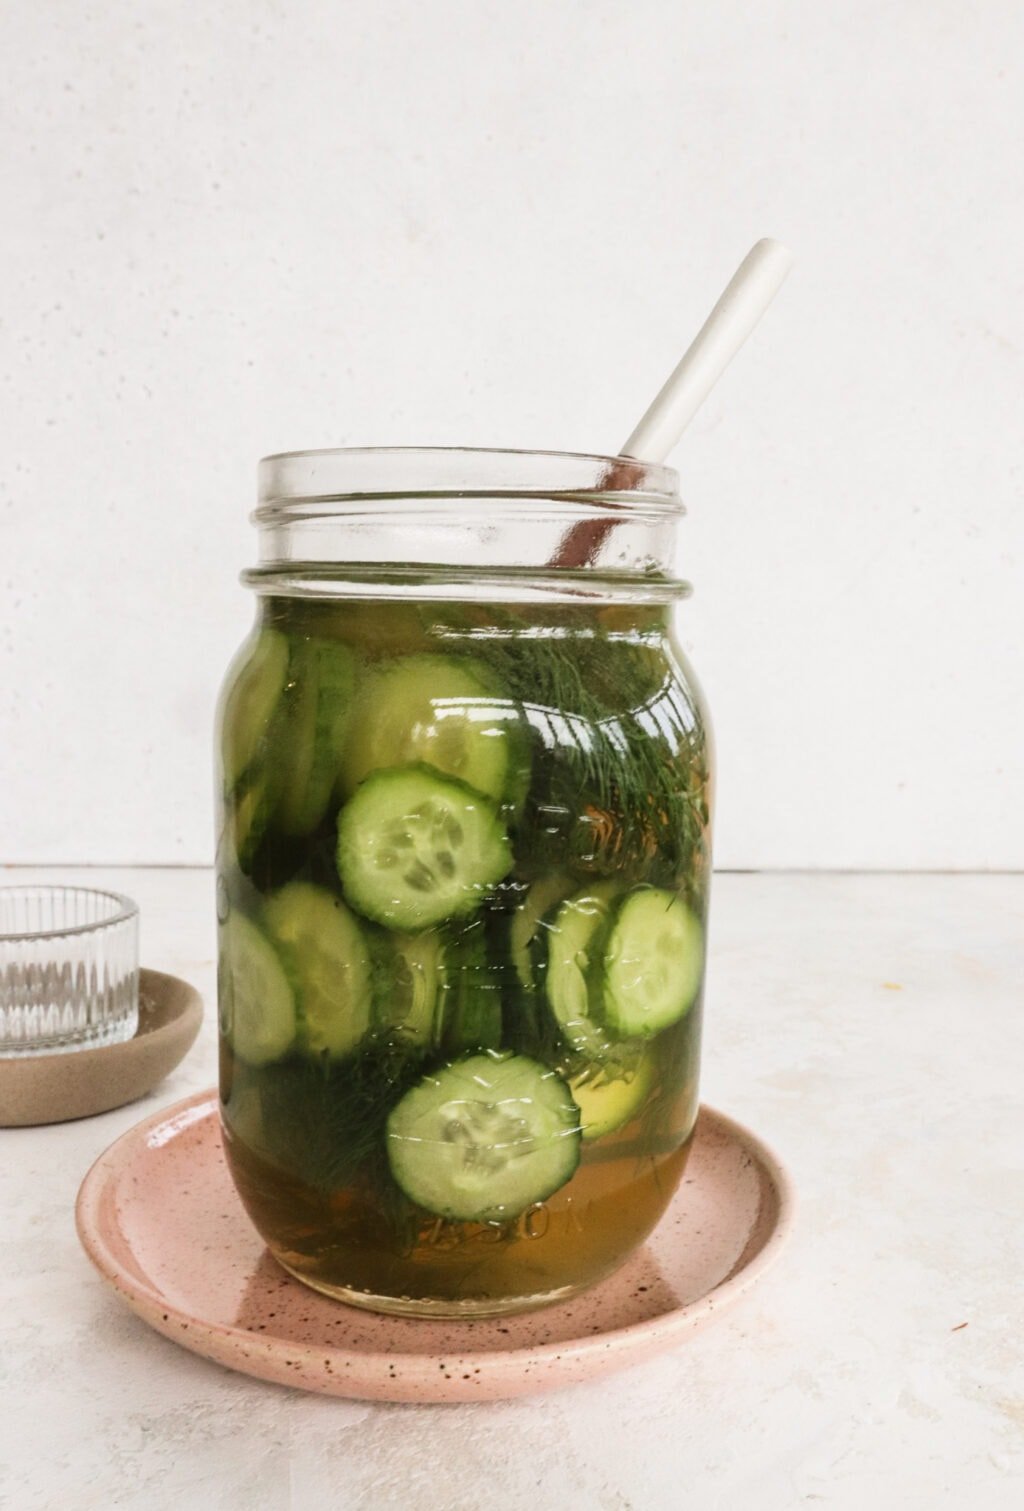 Apple Cider Vinegar Cucumber Pickles with Dill in a pickle jar with a wood spoon